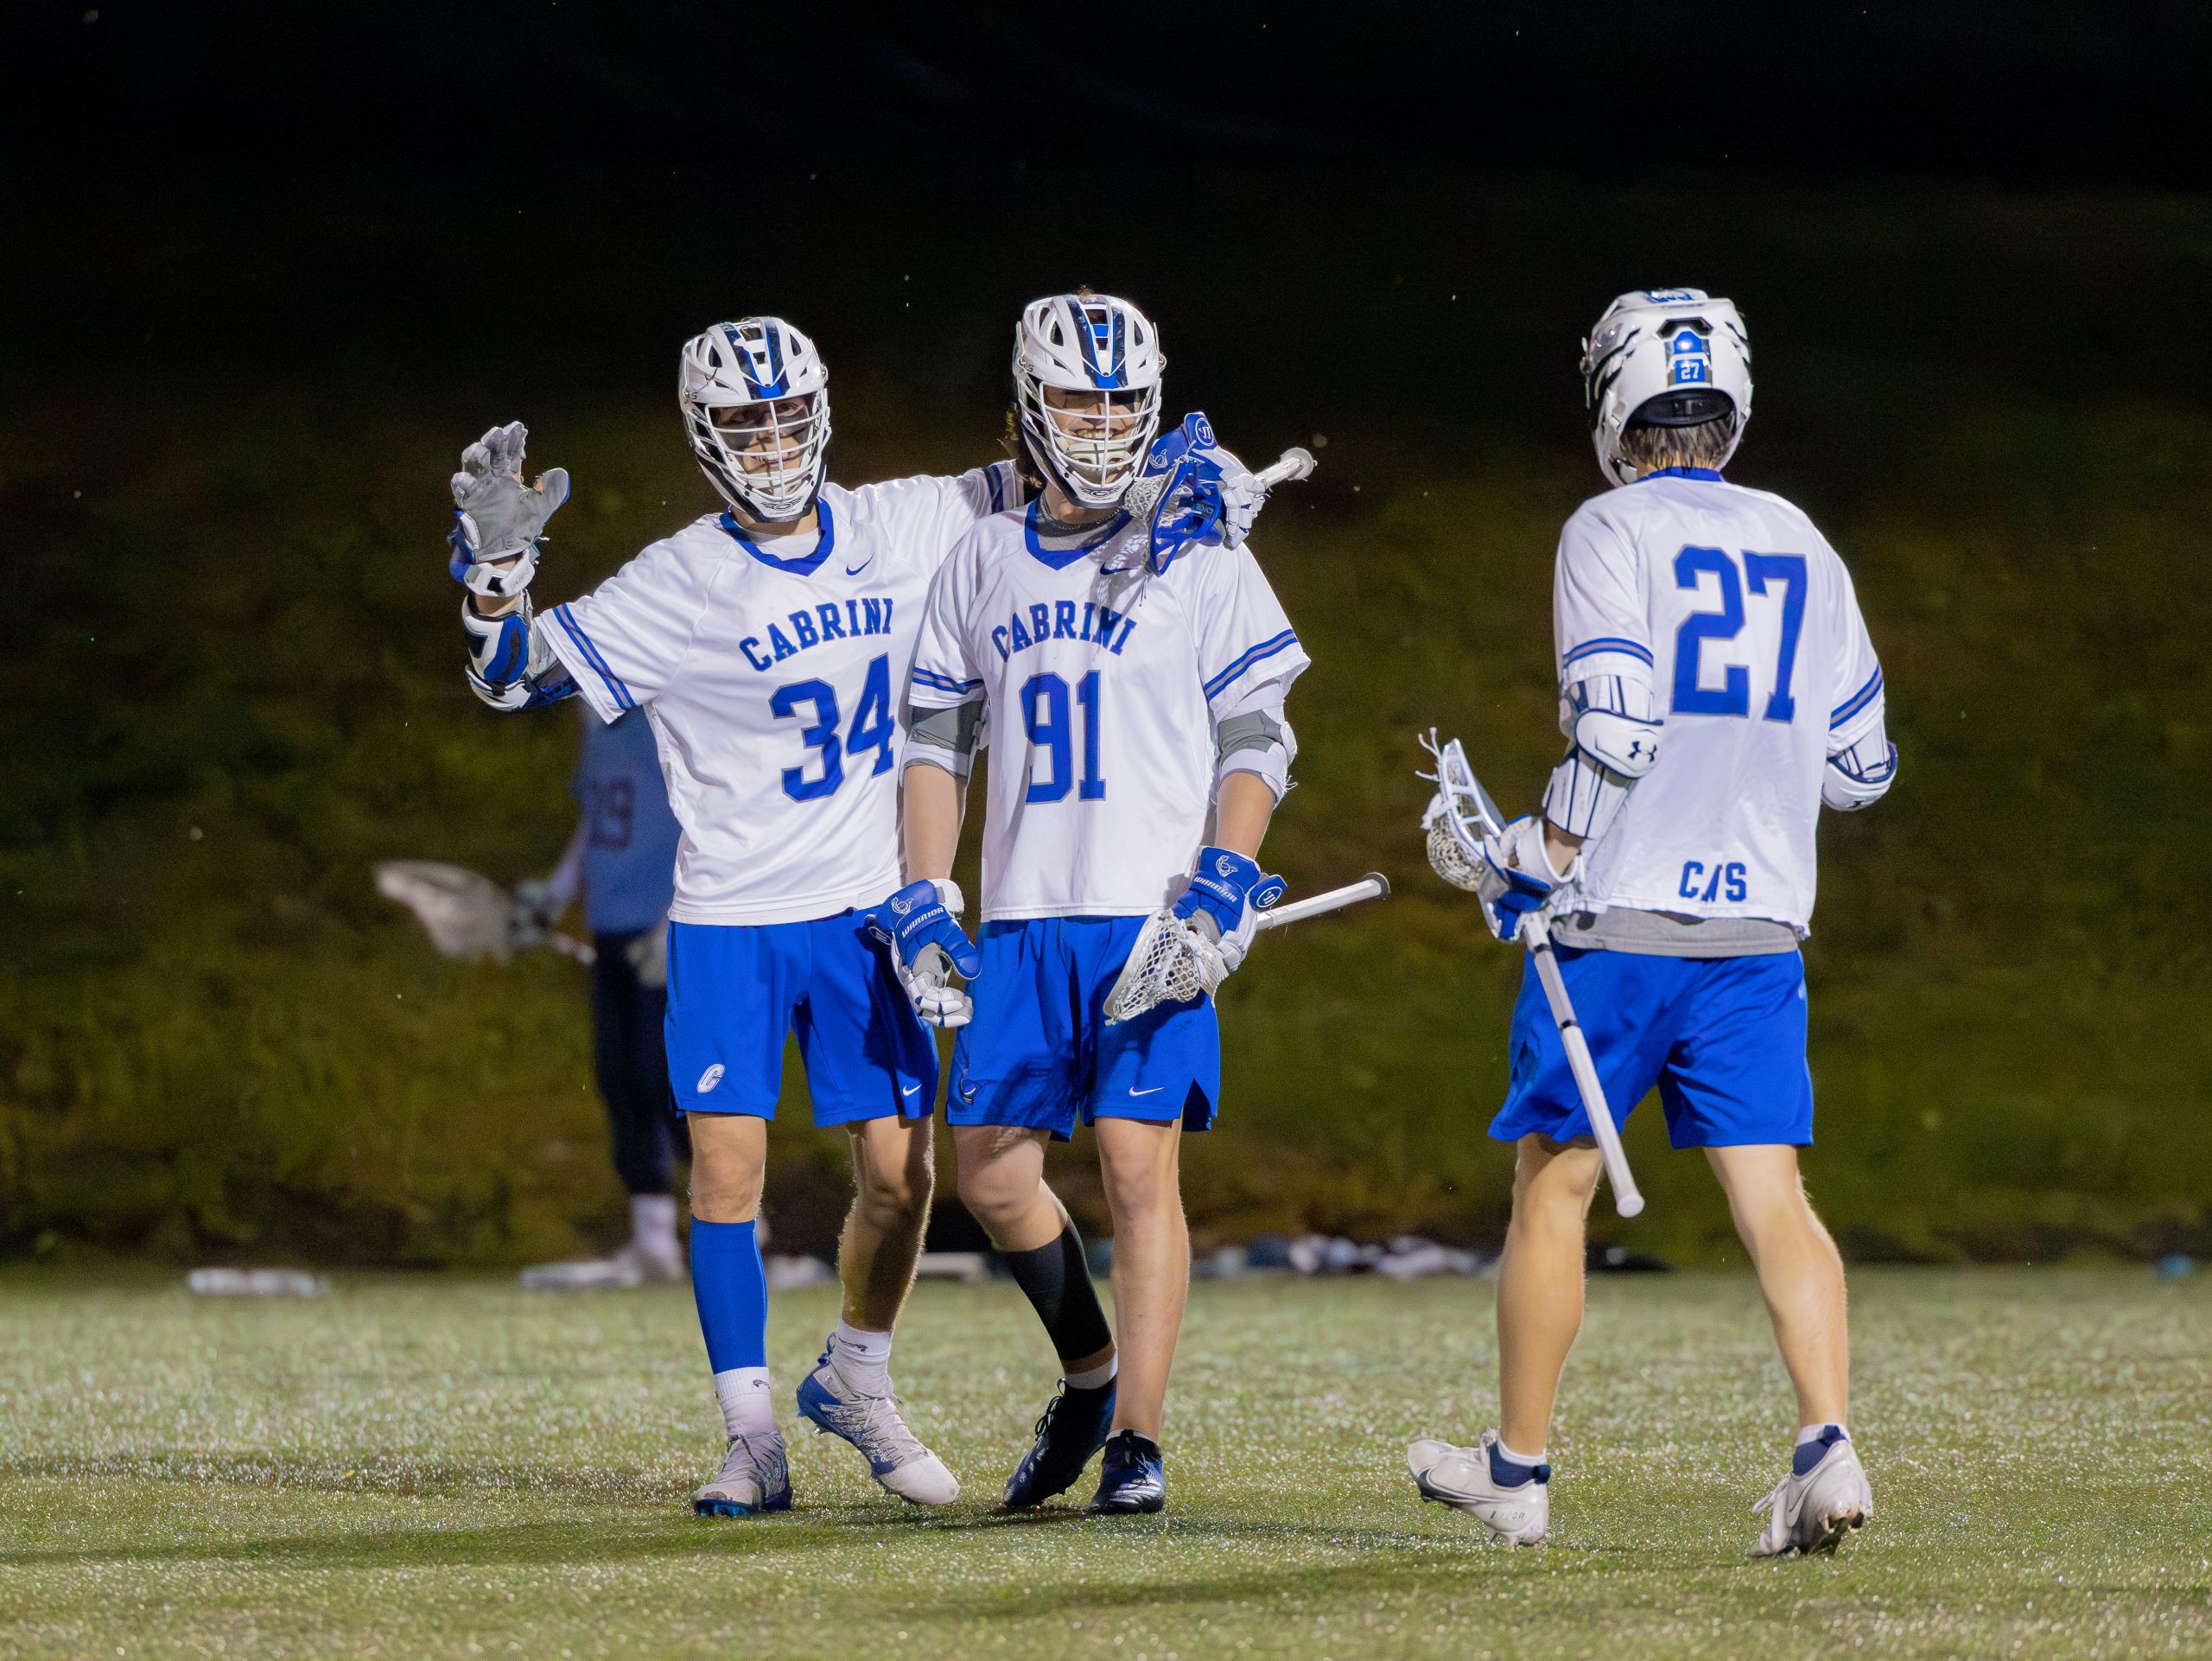 (From left to right) Dillon McManus, Thomas Vaughan, and Connor Herraiz celebrating a goal. Photo by Thomas Ryan.